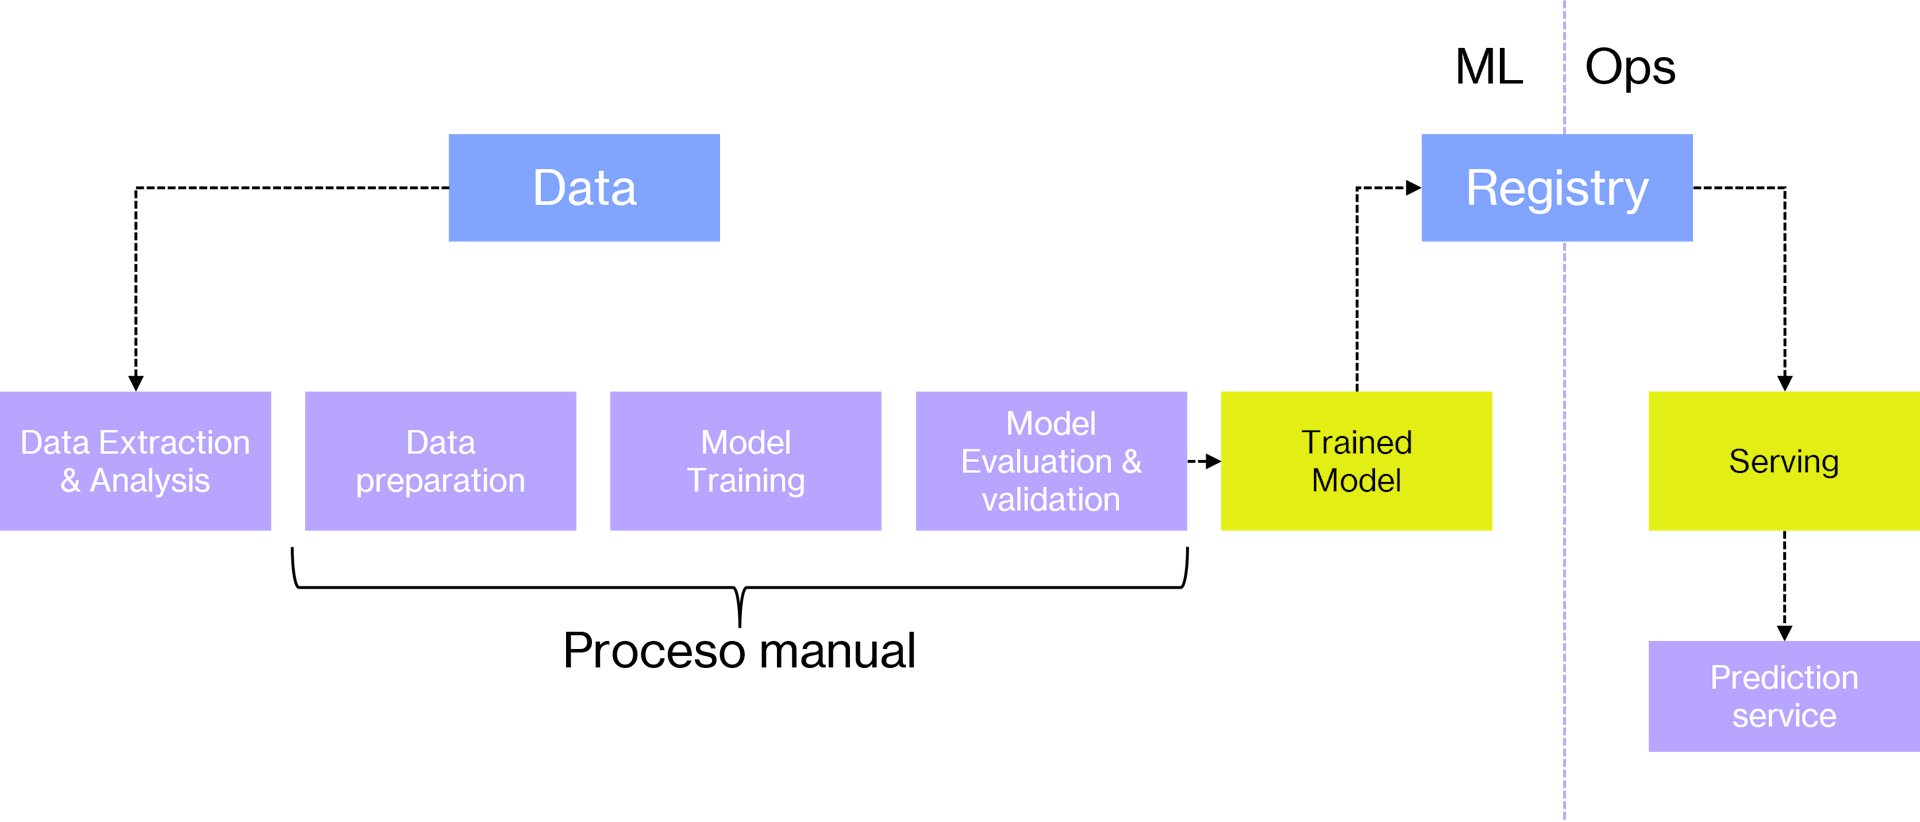 machine-learning-operations-content14